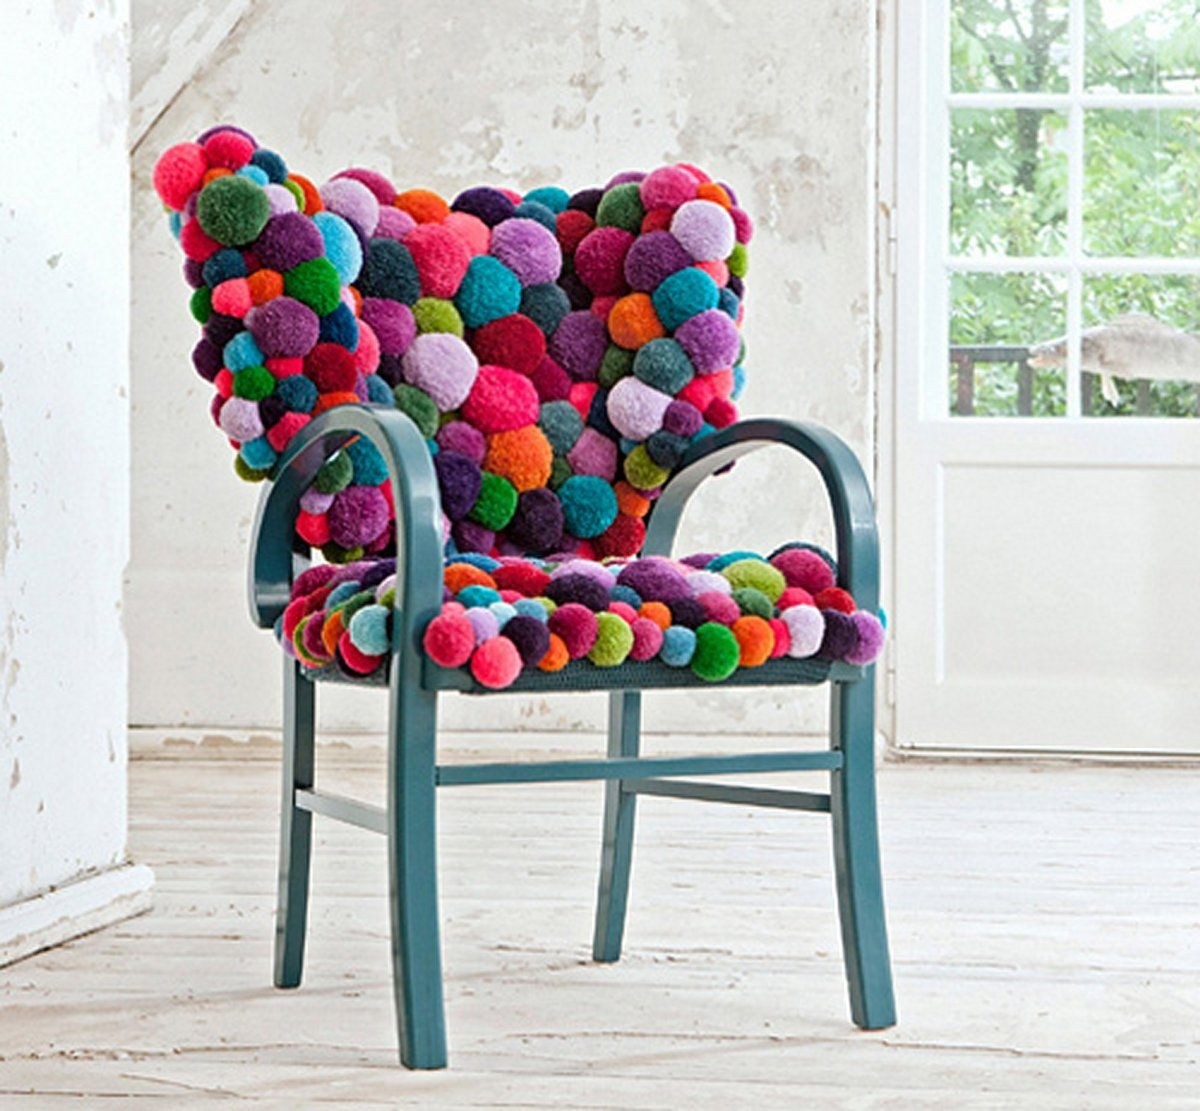 Add some color into your home with these unique furniture